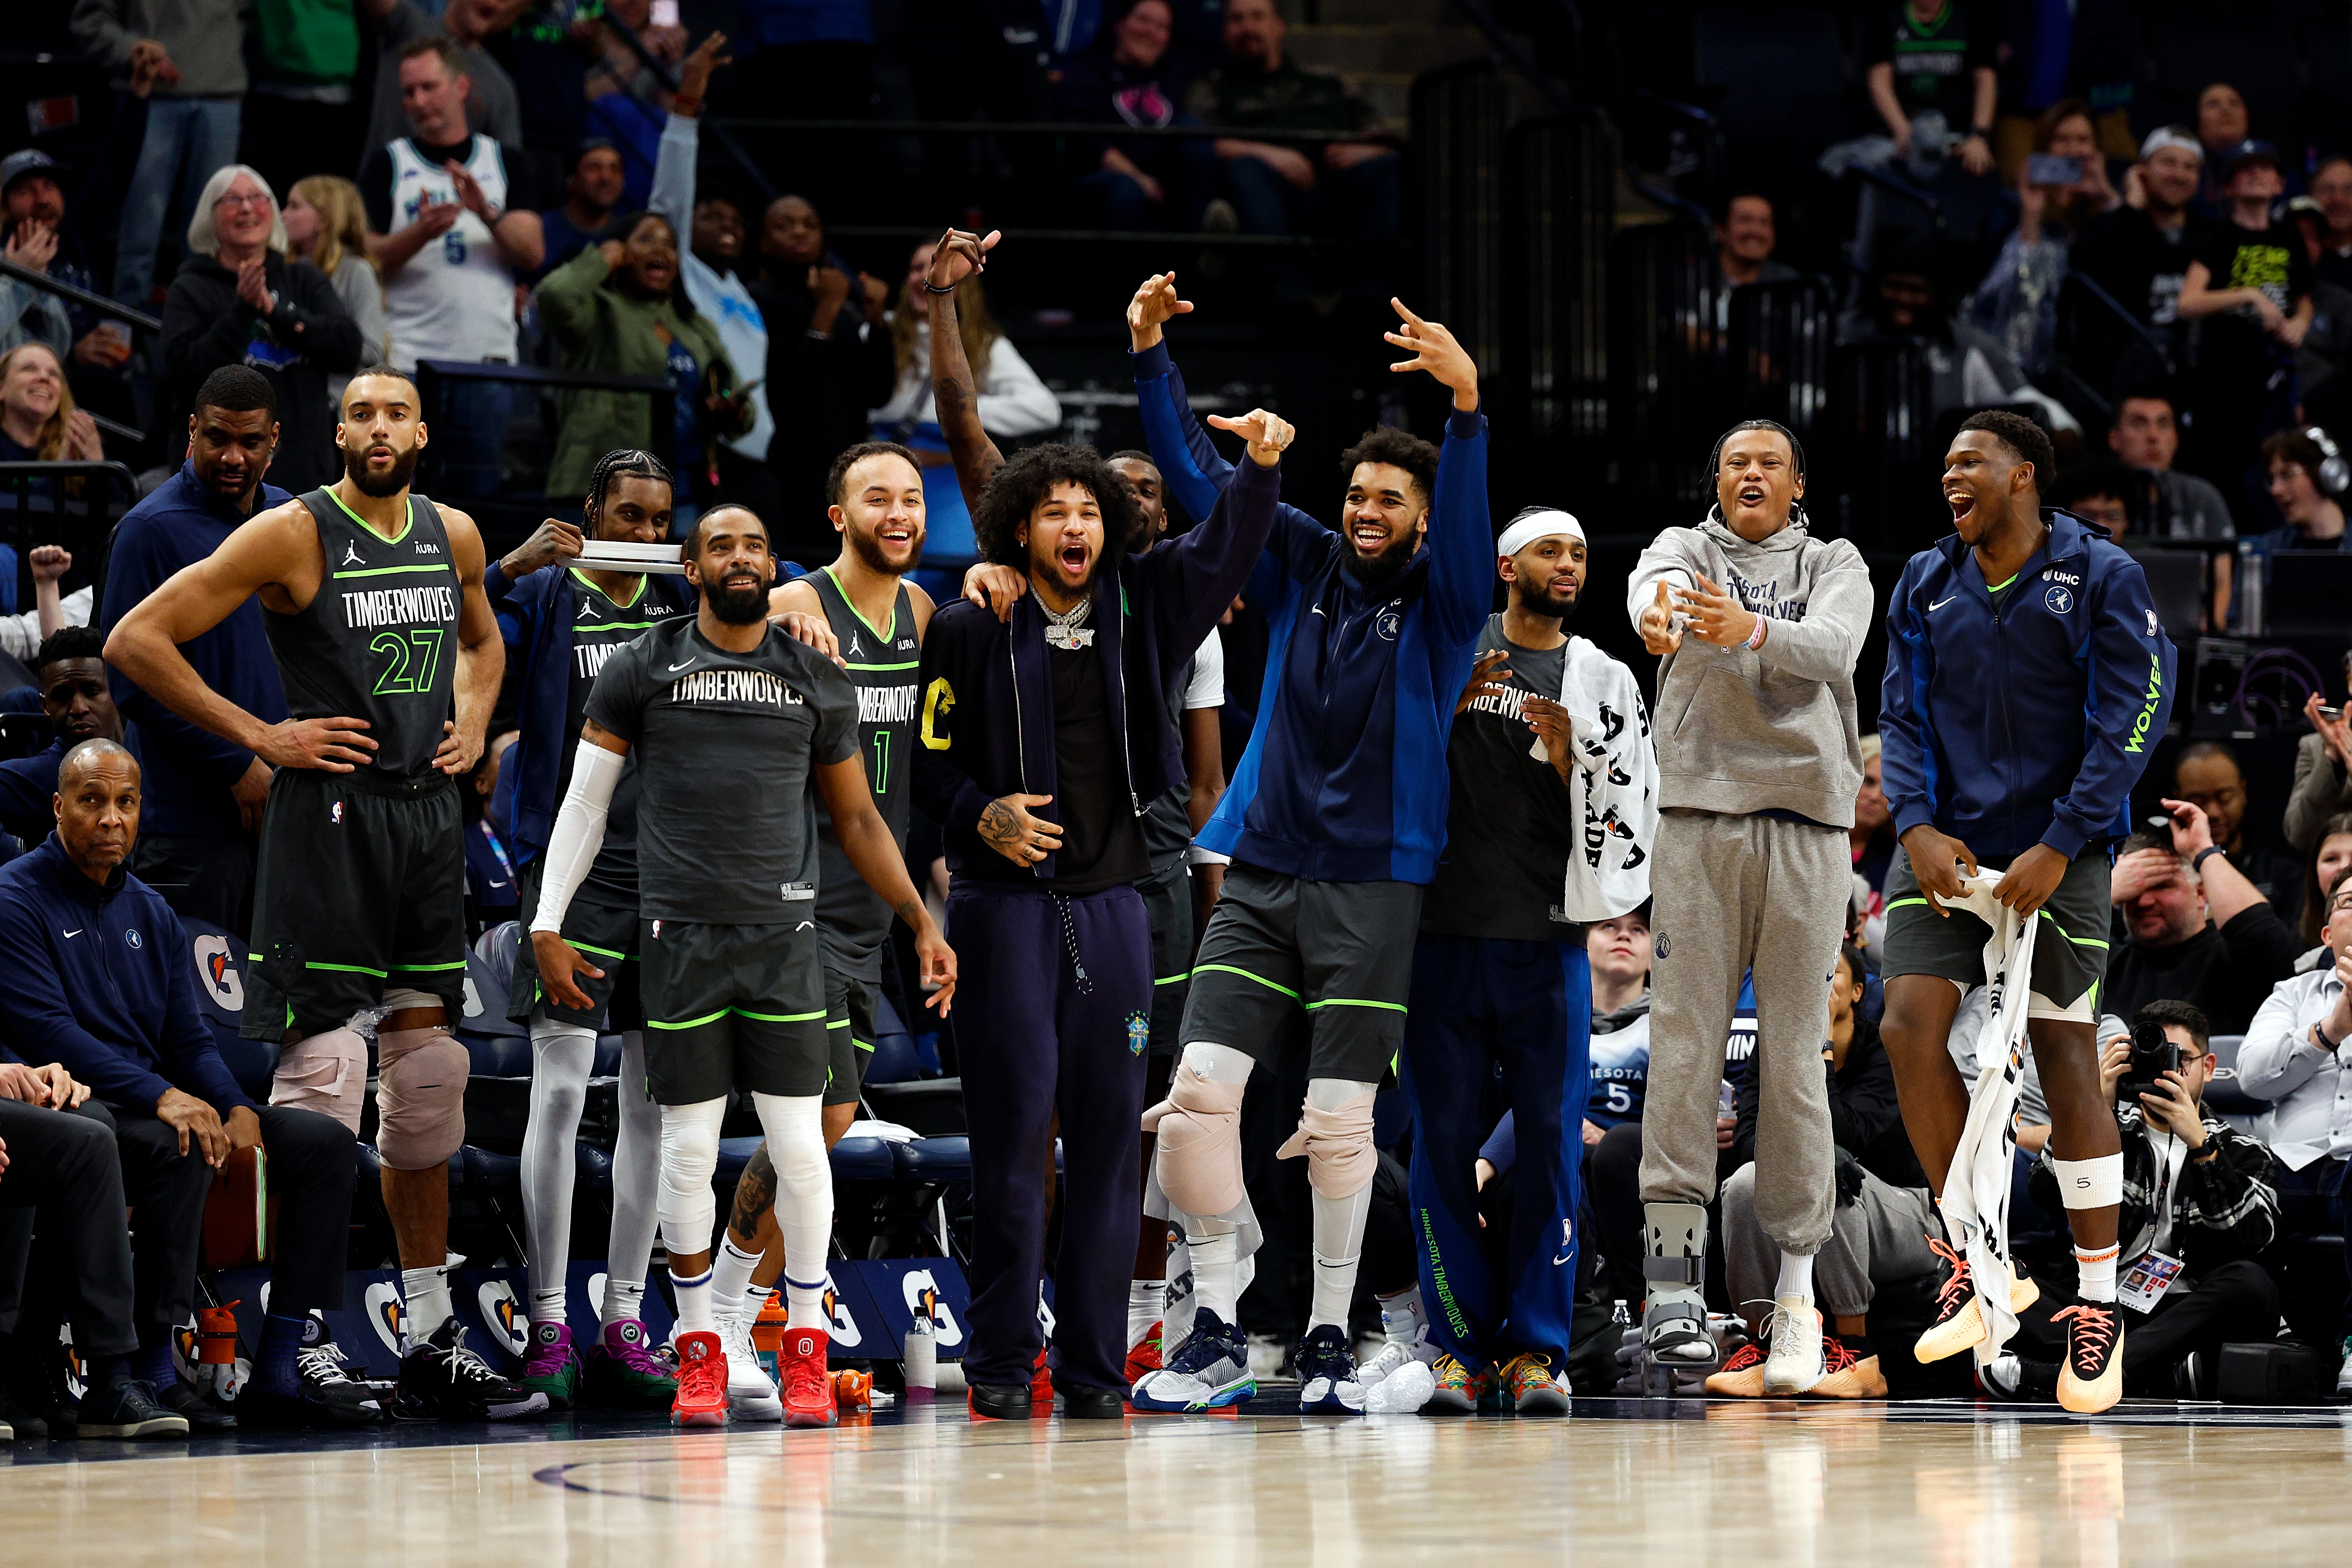 Timberwolves players dressed in uniform standing courtside, smiling and cheering at their teammates on the court.